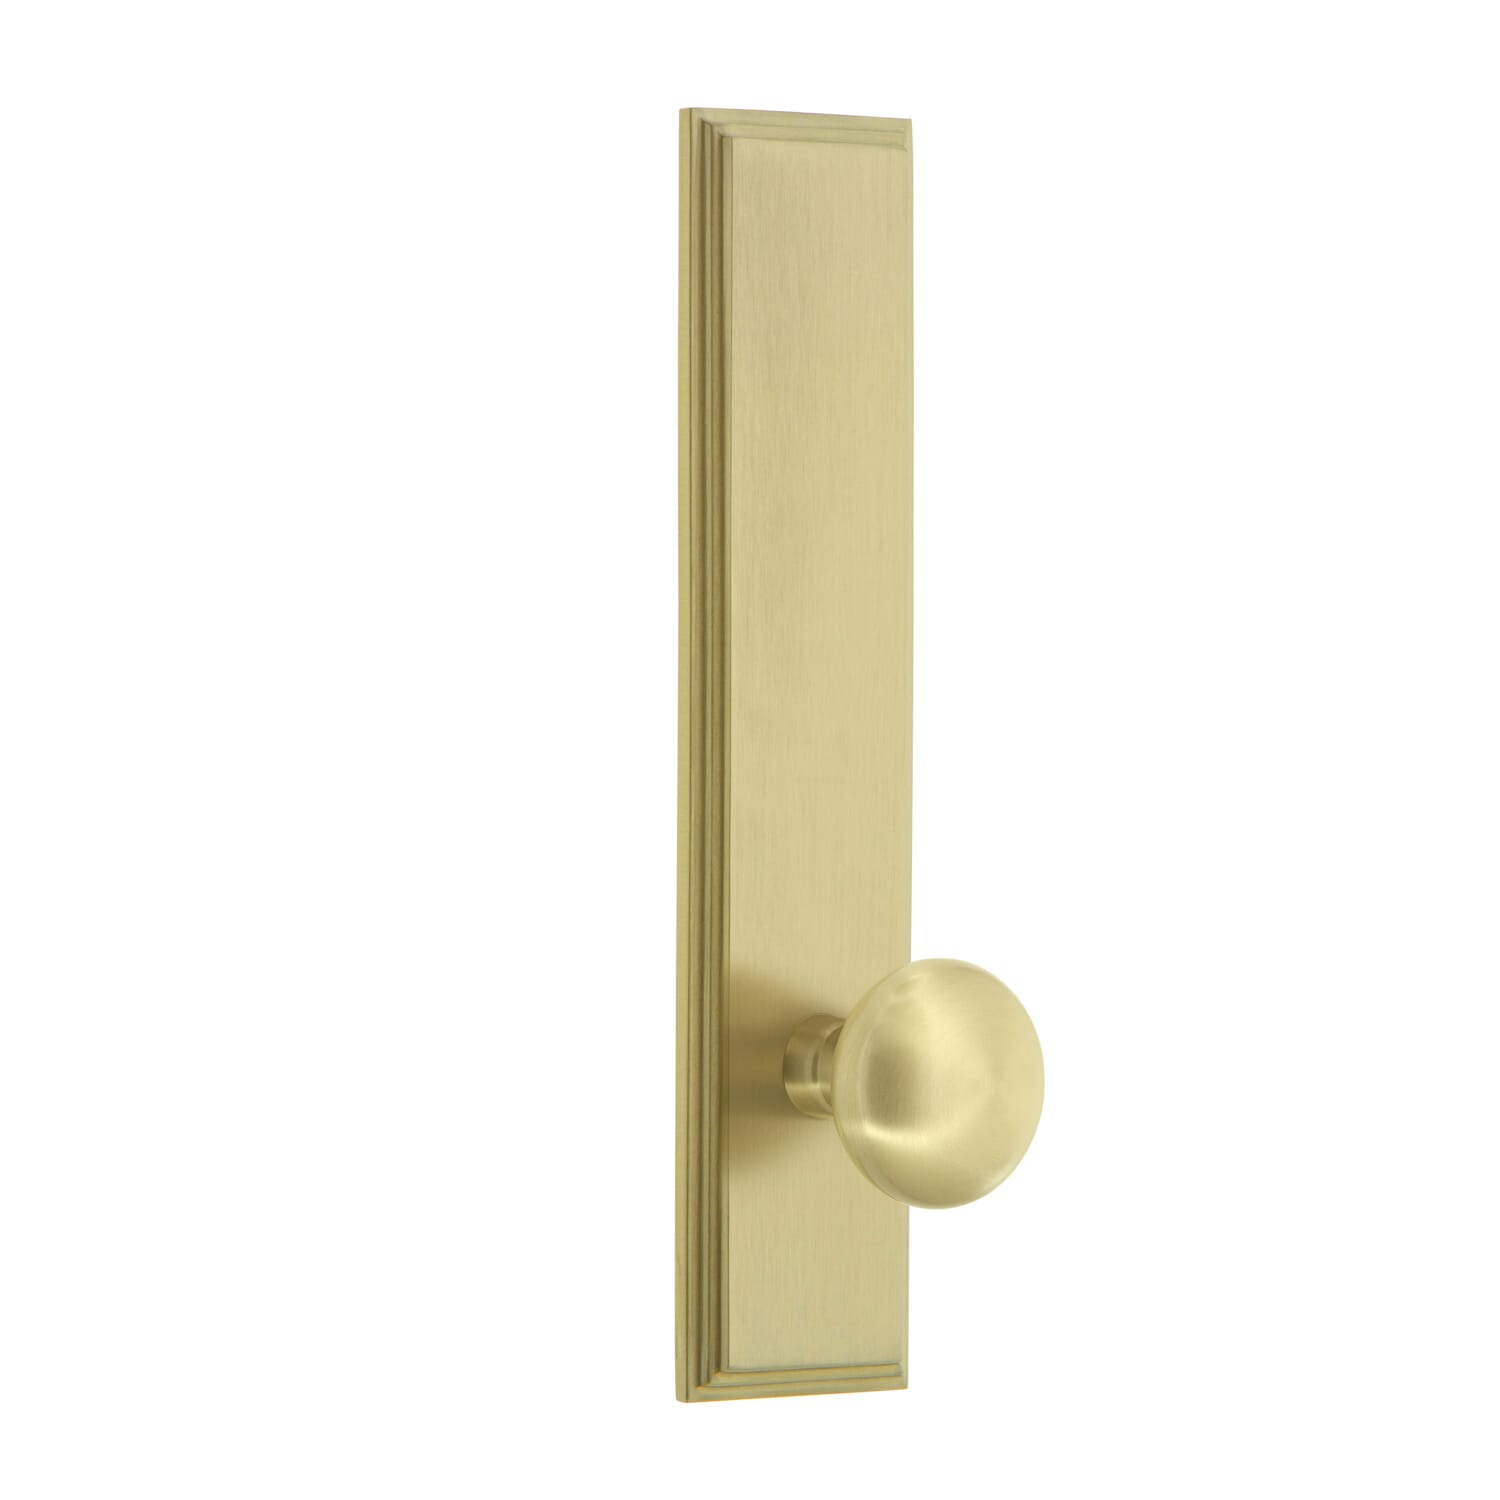 Carré Tall Plate Complete Entry Set with Carré Knob in Satin Brass